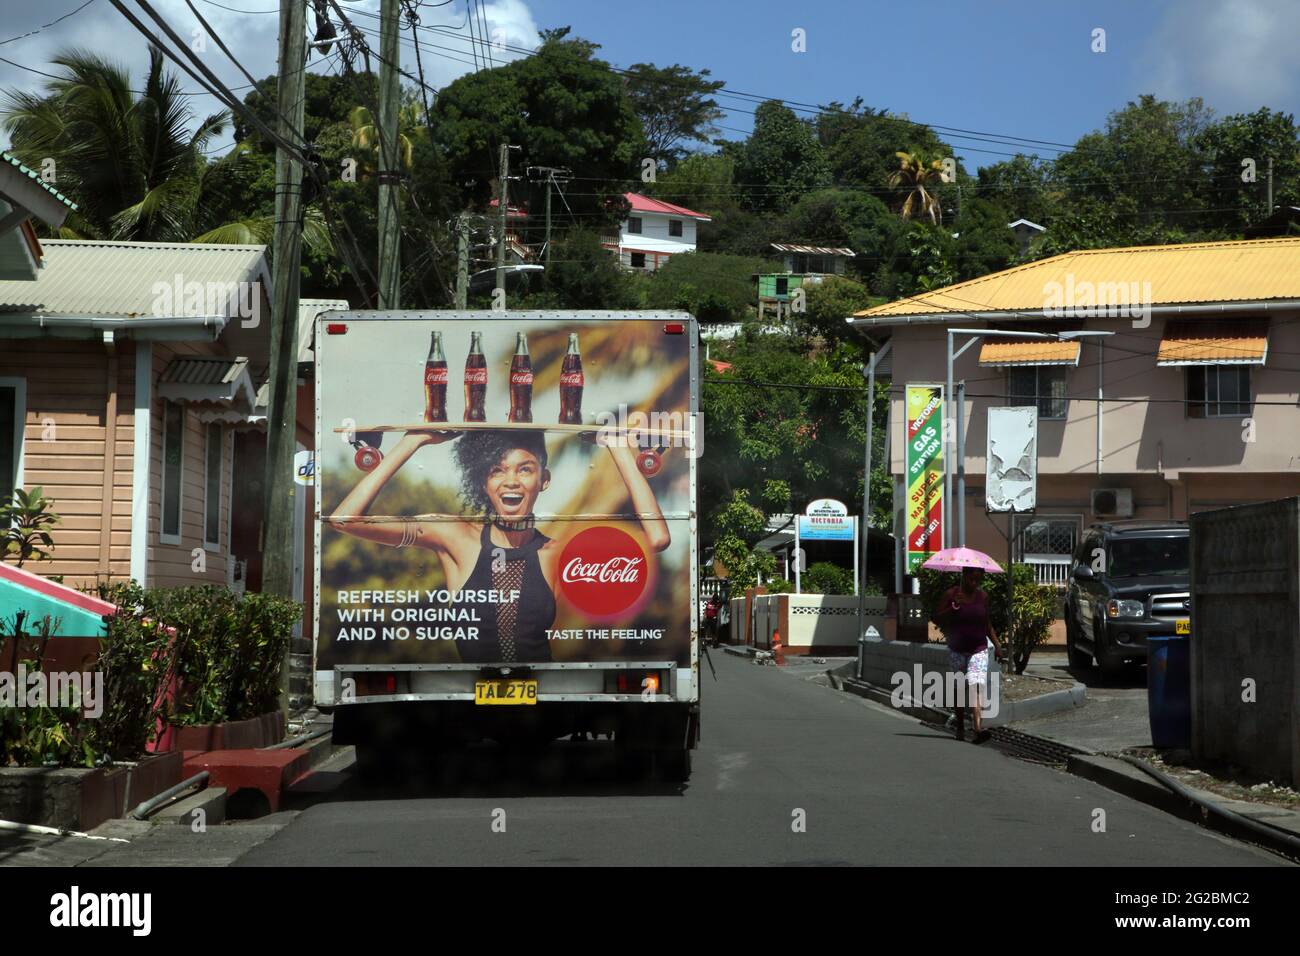 Victoria St Mark Grenada Street Scene Coca Cola Delivery Van by Seventh Day Baptist Church and Woman using Umbrella as Sunshade Stock Photo